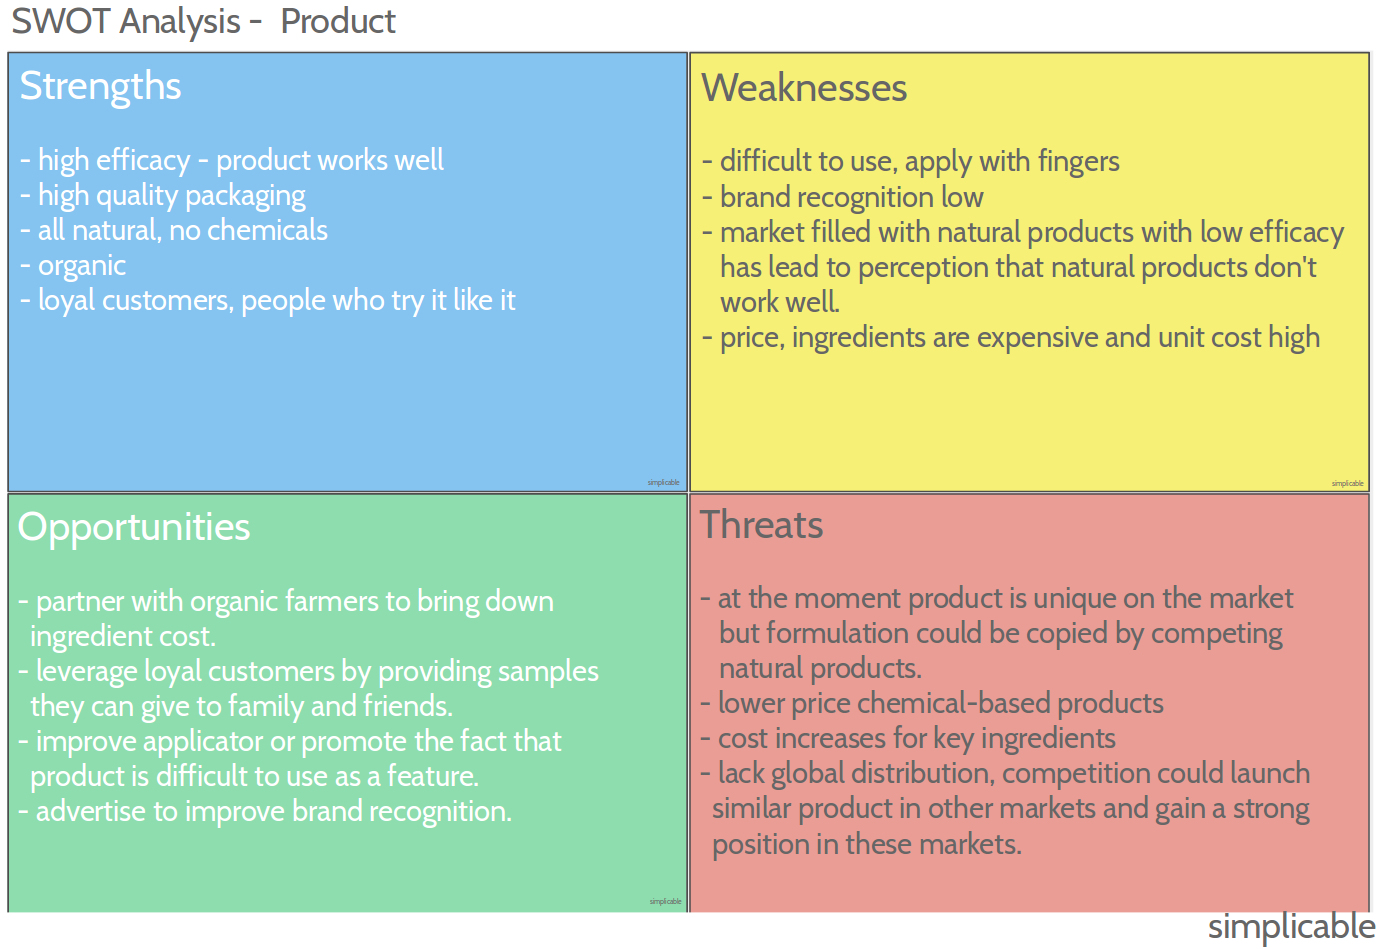 Example of a swot analysis for an organic cosmetic product that works well but is difficult to use.